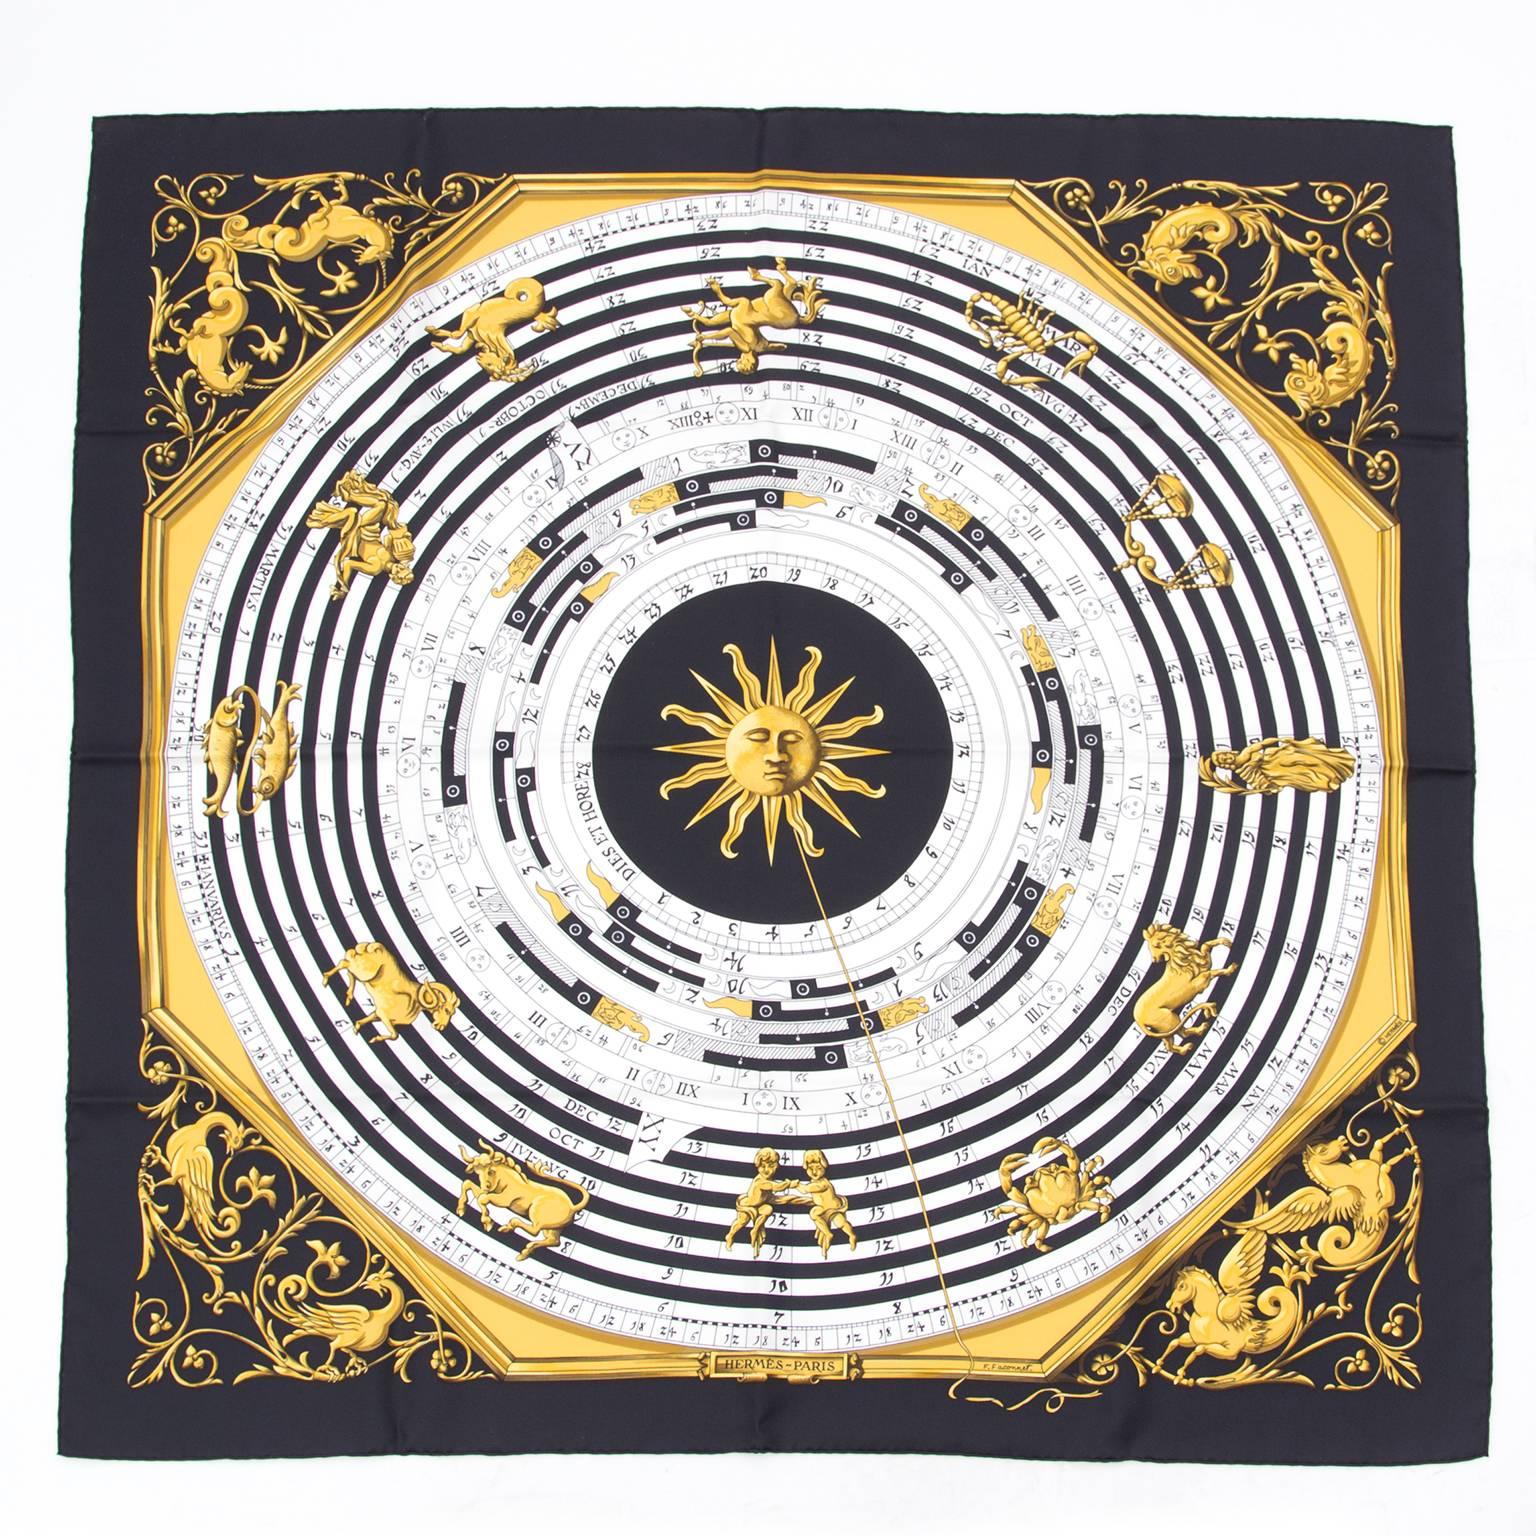 This is an authentic Hermès 'Carré' scarf, 100% silk with a beautiful classic Calendar & Horoscope theme print. Elegant cream color with black trim with yellow print.